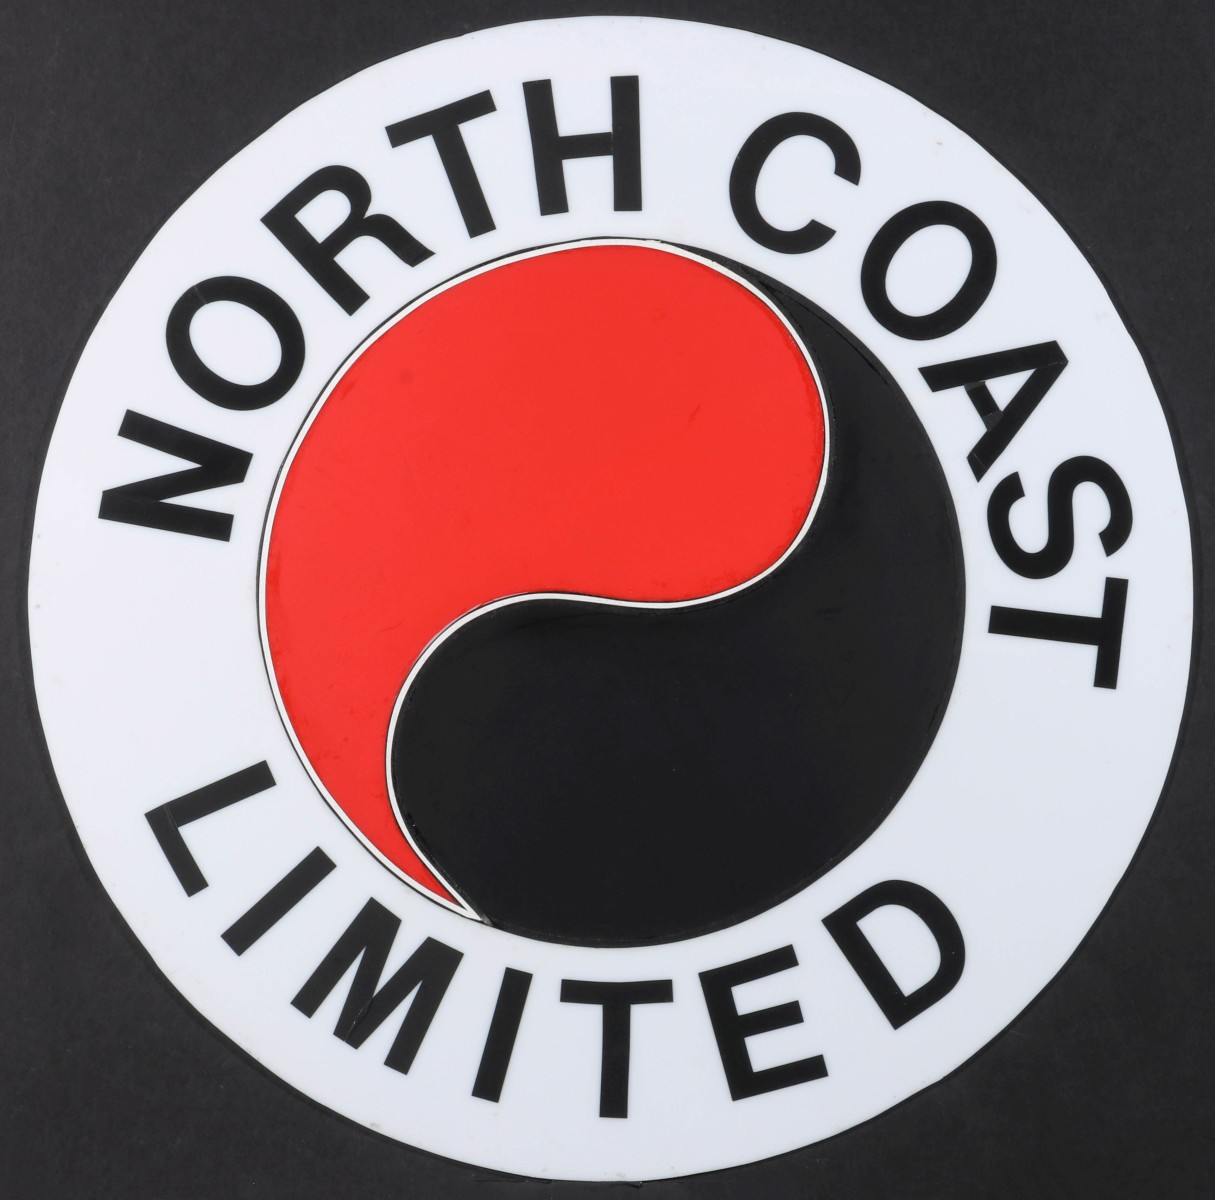 DRUMHEAD INSERT FOR NORTHERN PACIFIC NORTH COAST LTD